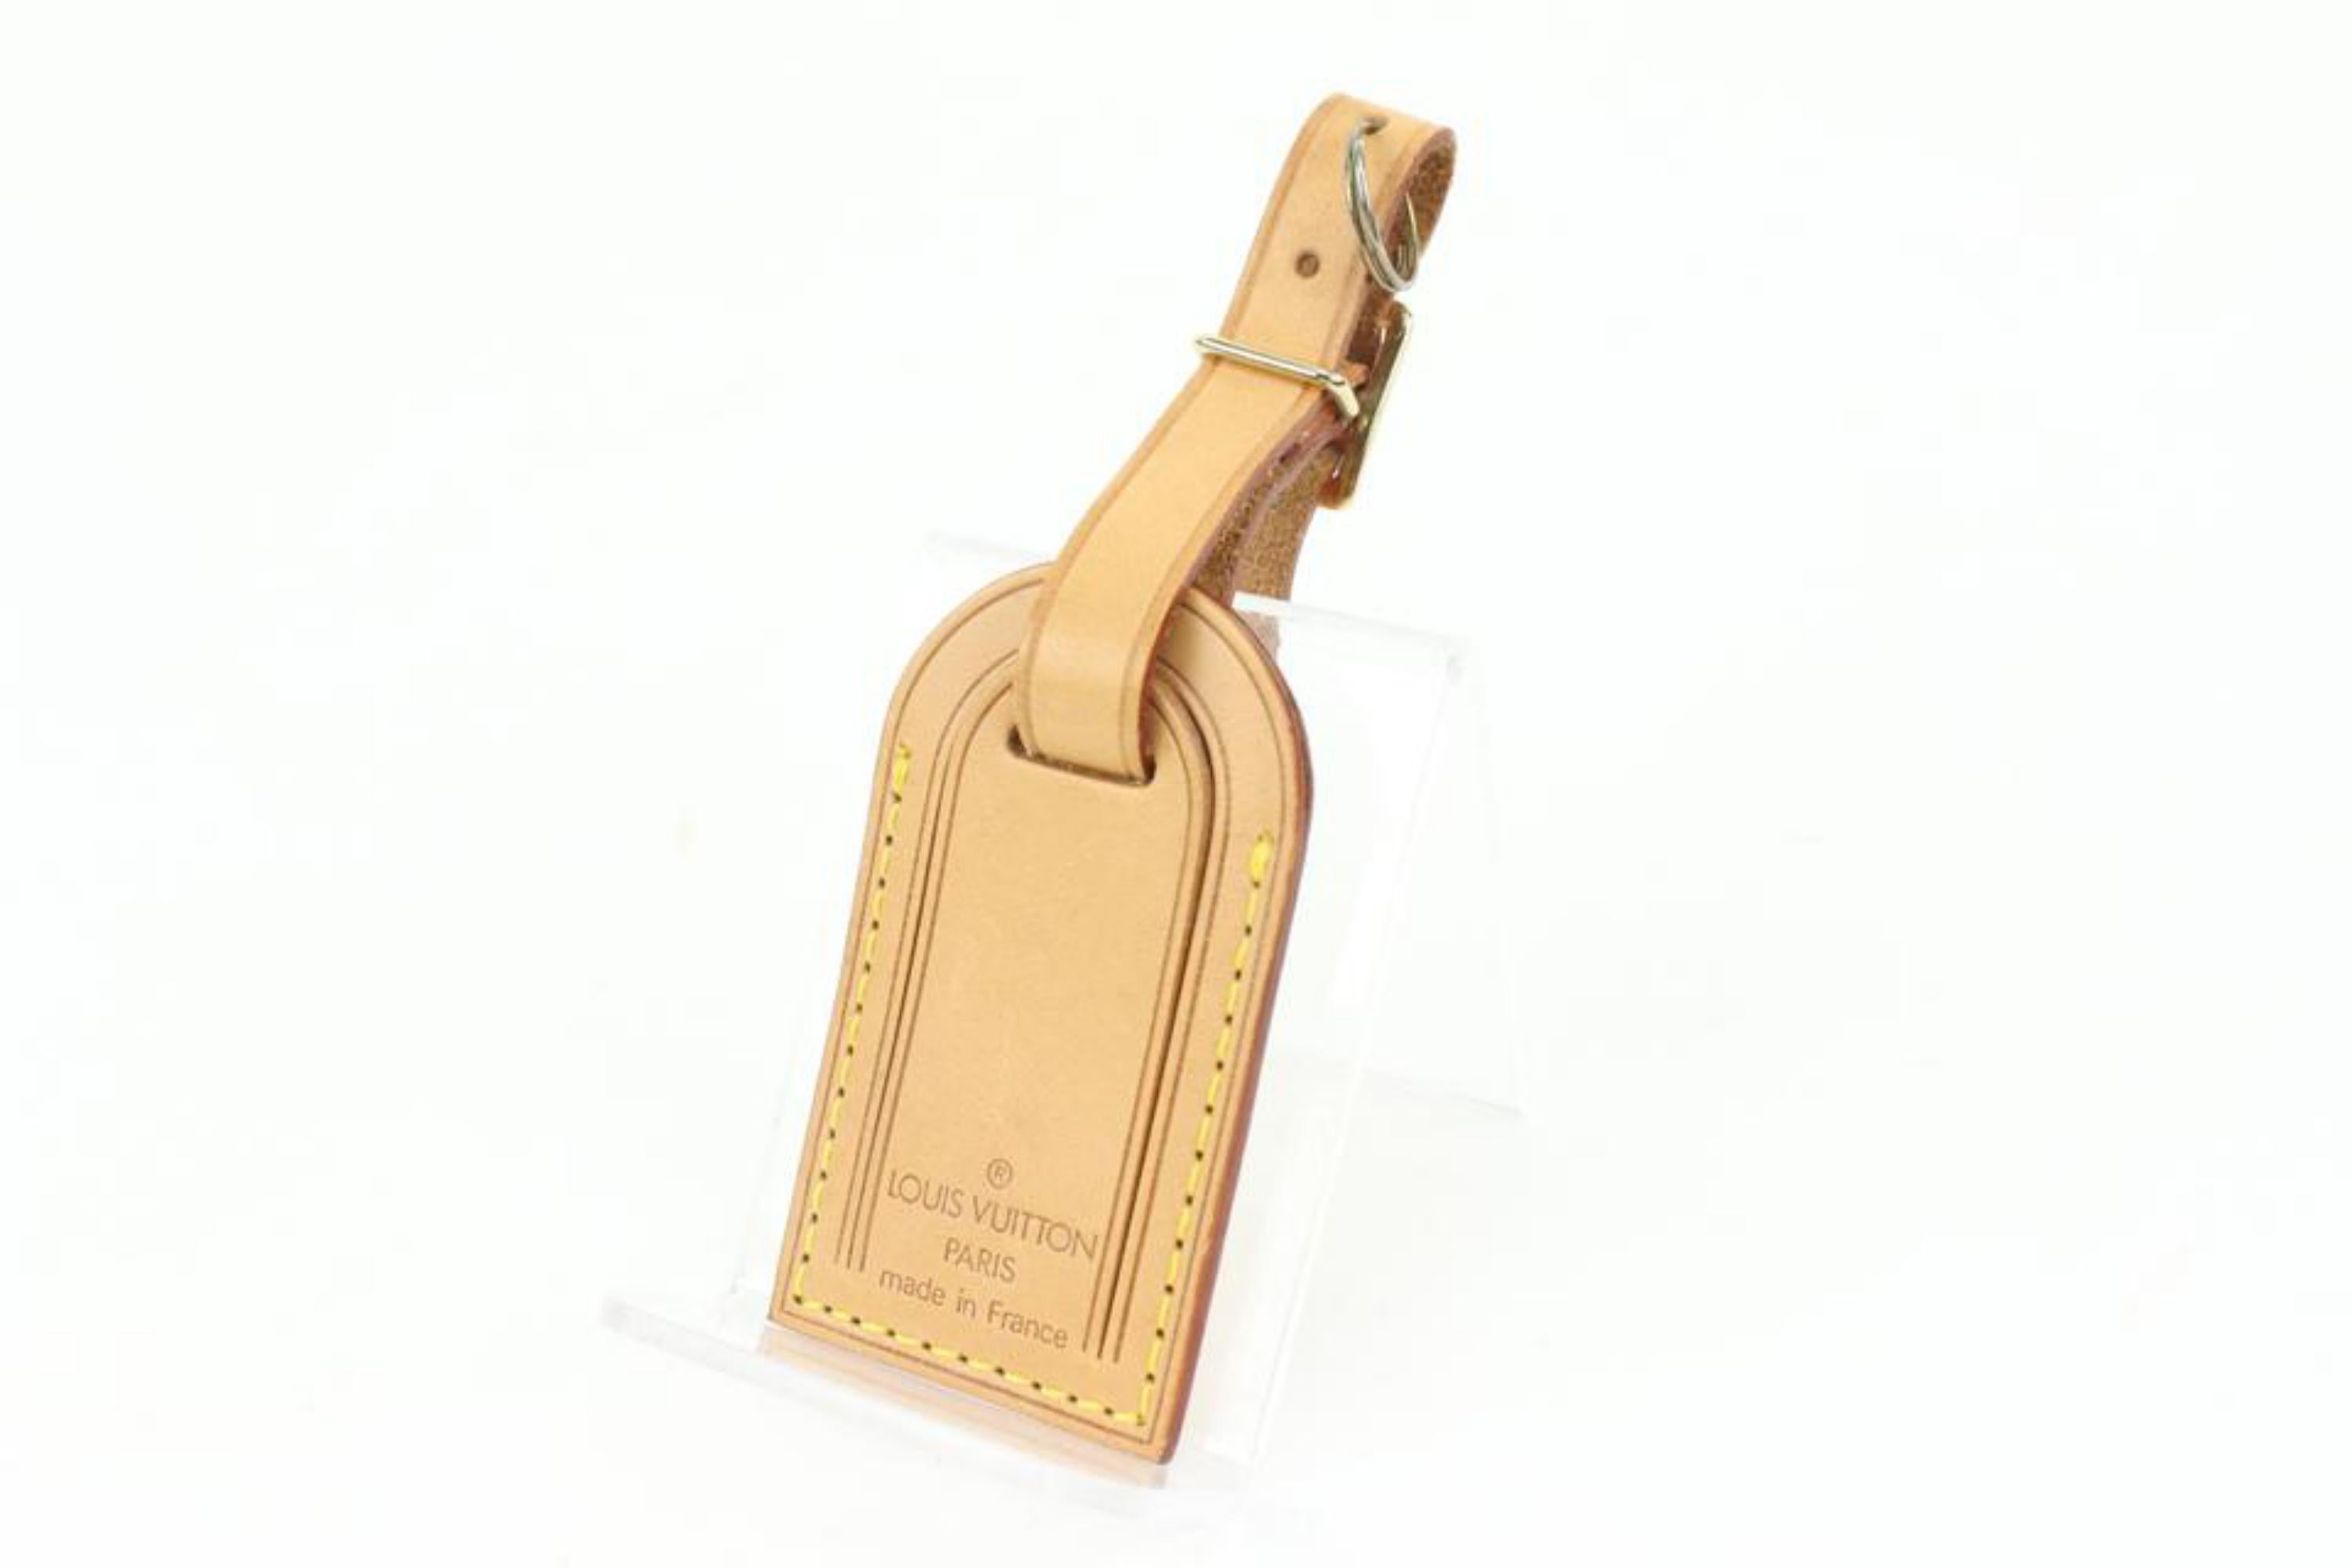 Louis Vuitton Natural Vachetta Leather Luggage Tag 27lk37s
Made In: France
Measurements: Length:  1.6